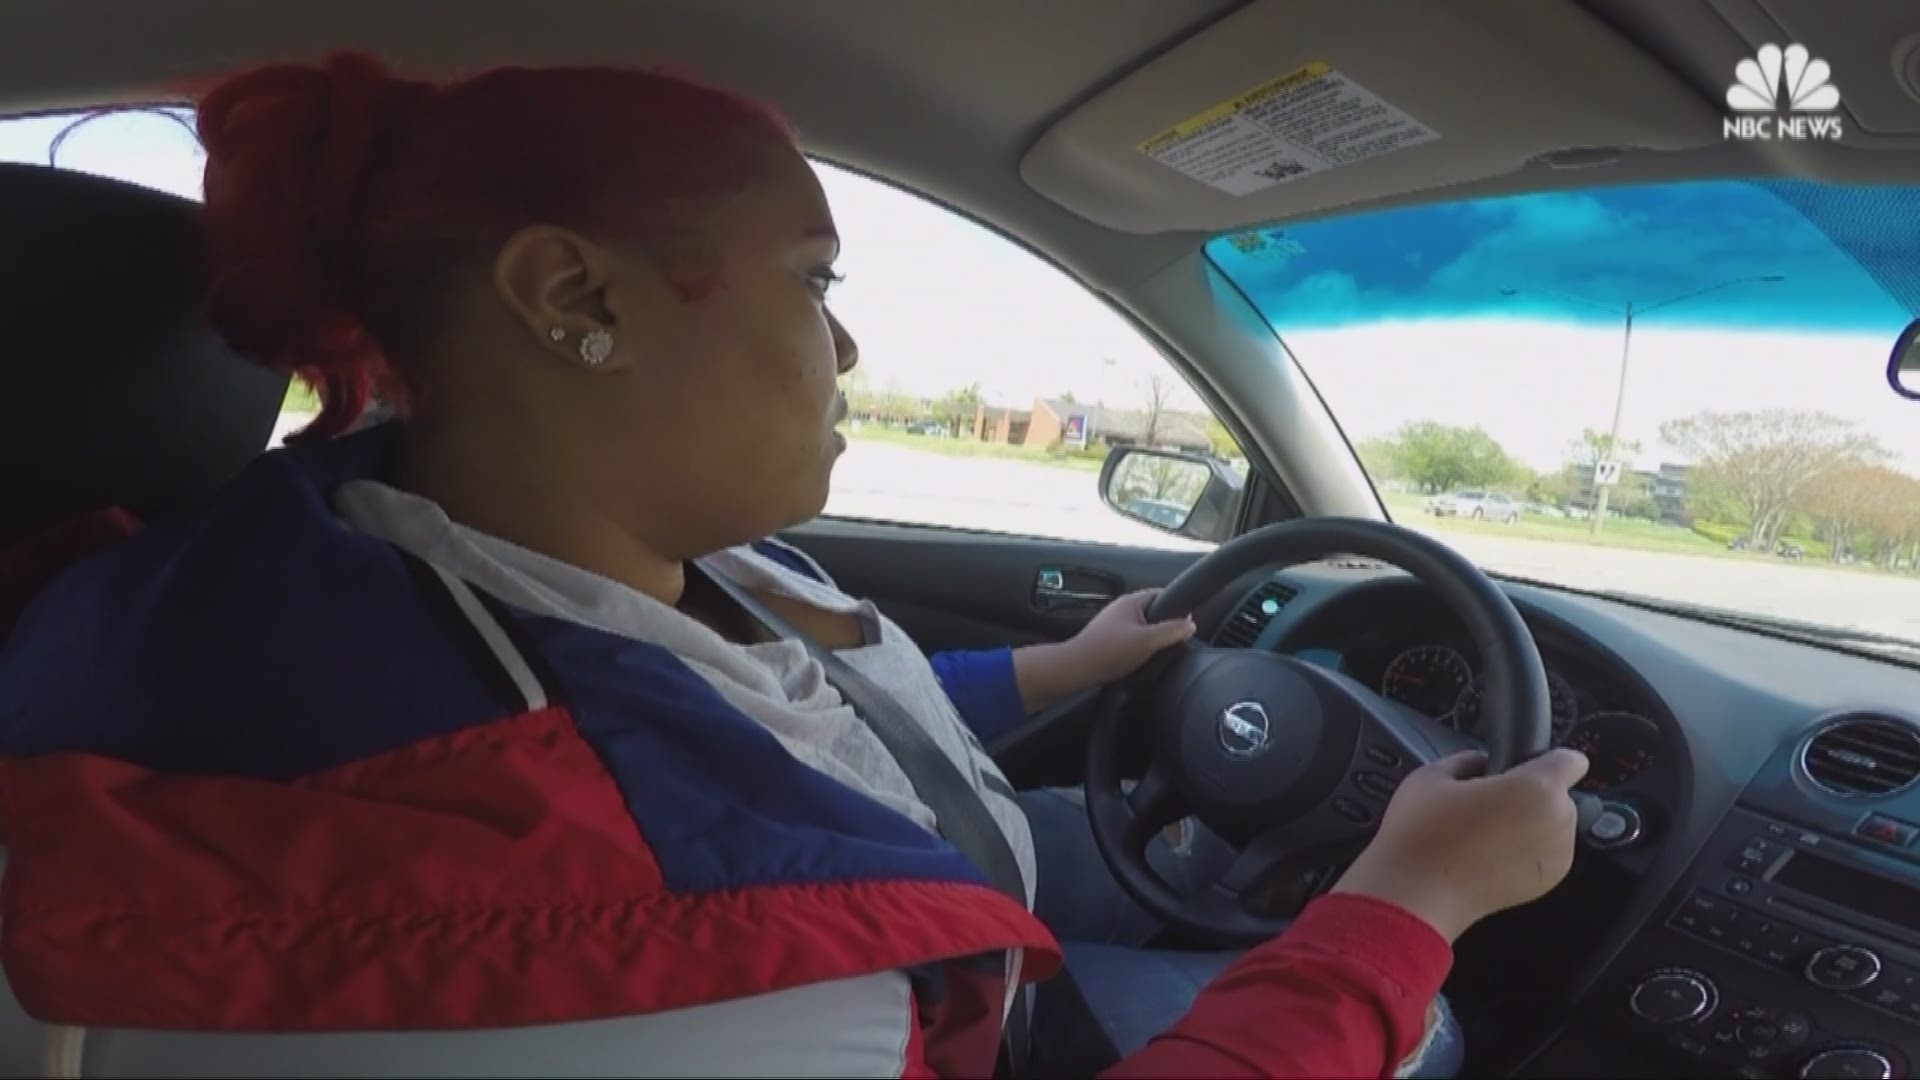 Parents often have rules for their teen drivers - parameters set to encourage safe driving for new hands on the wheel. But a Liberty Mutual study shows that parents aren't following the rules they're setting.